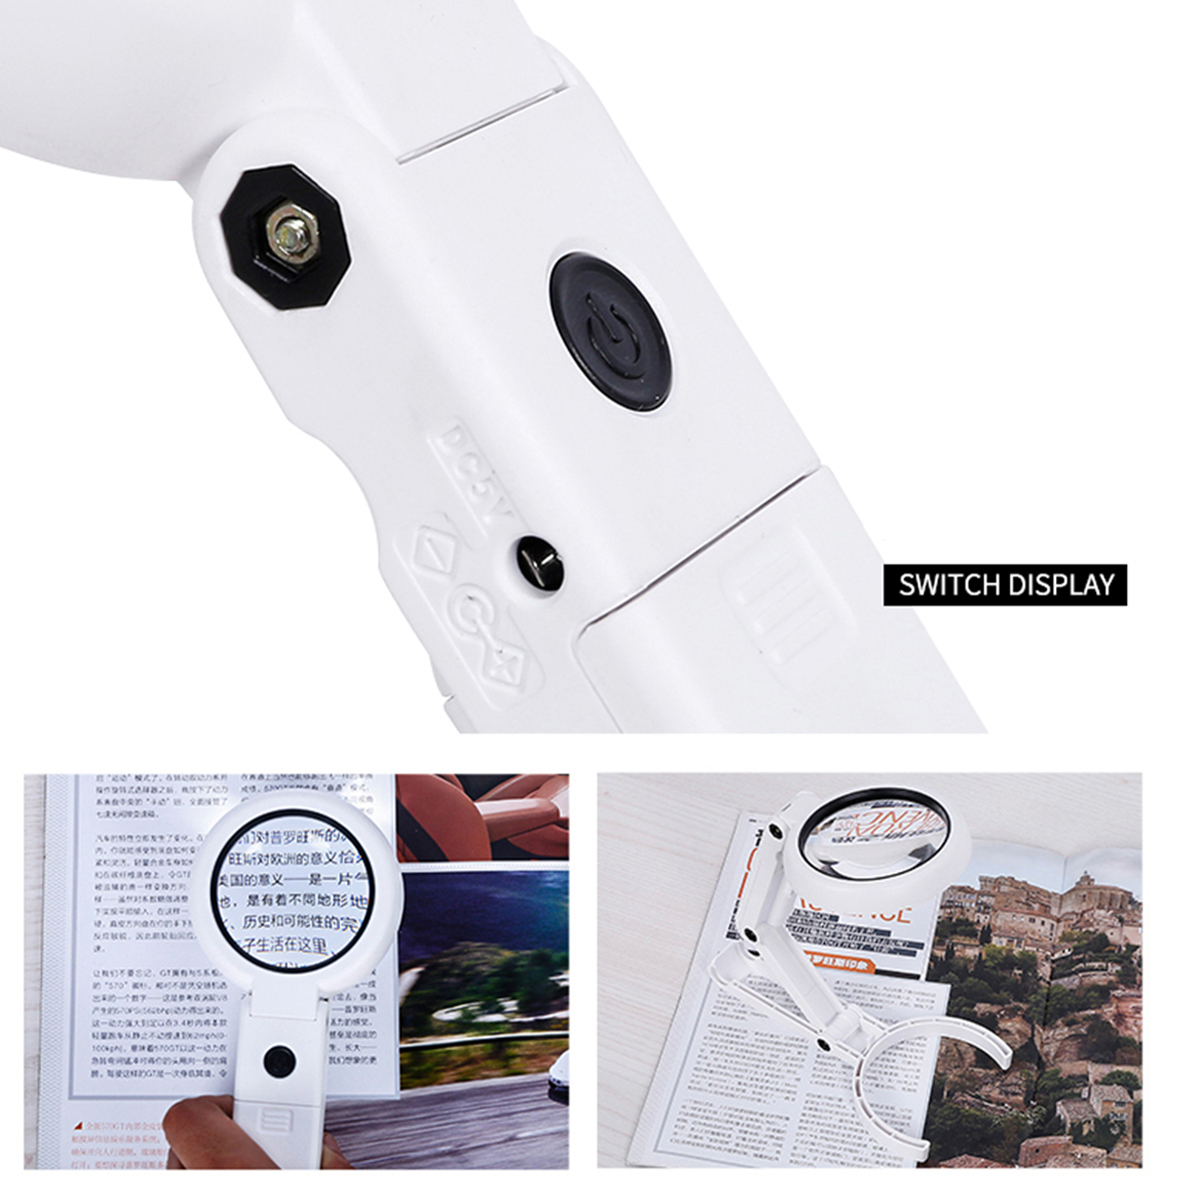 Handheld-Portable-Foldable-Lamp-Illuminated-Magnifier-5X-11X-Magnifying-Table-8-LED-Lights-Loupe-Mag-1472829-3